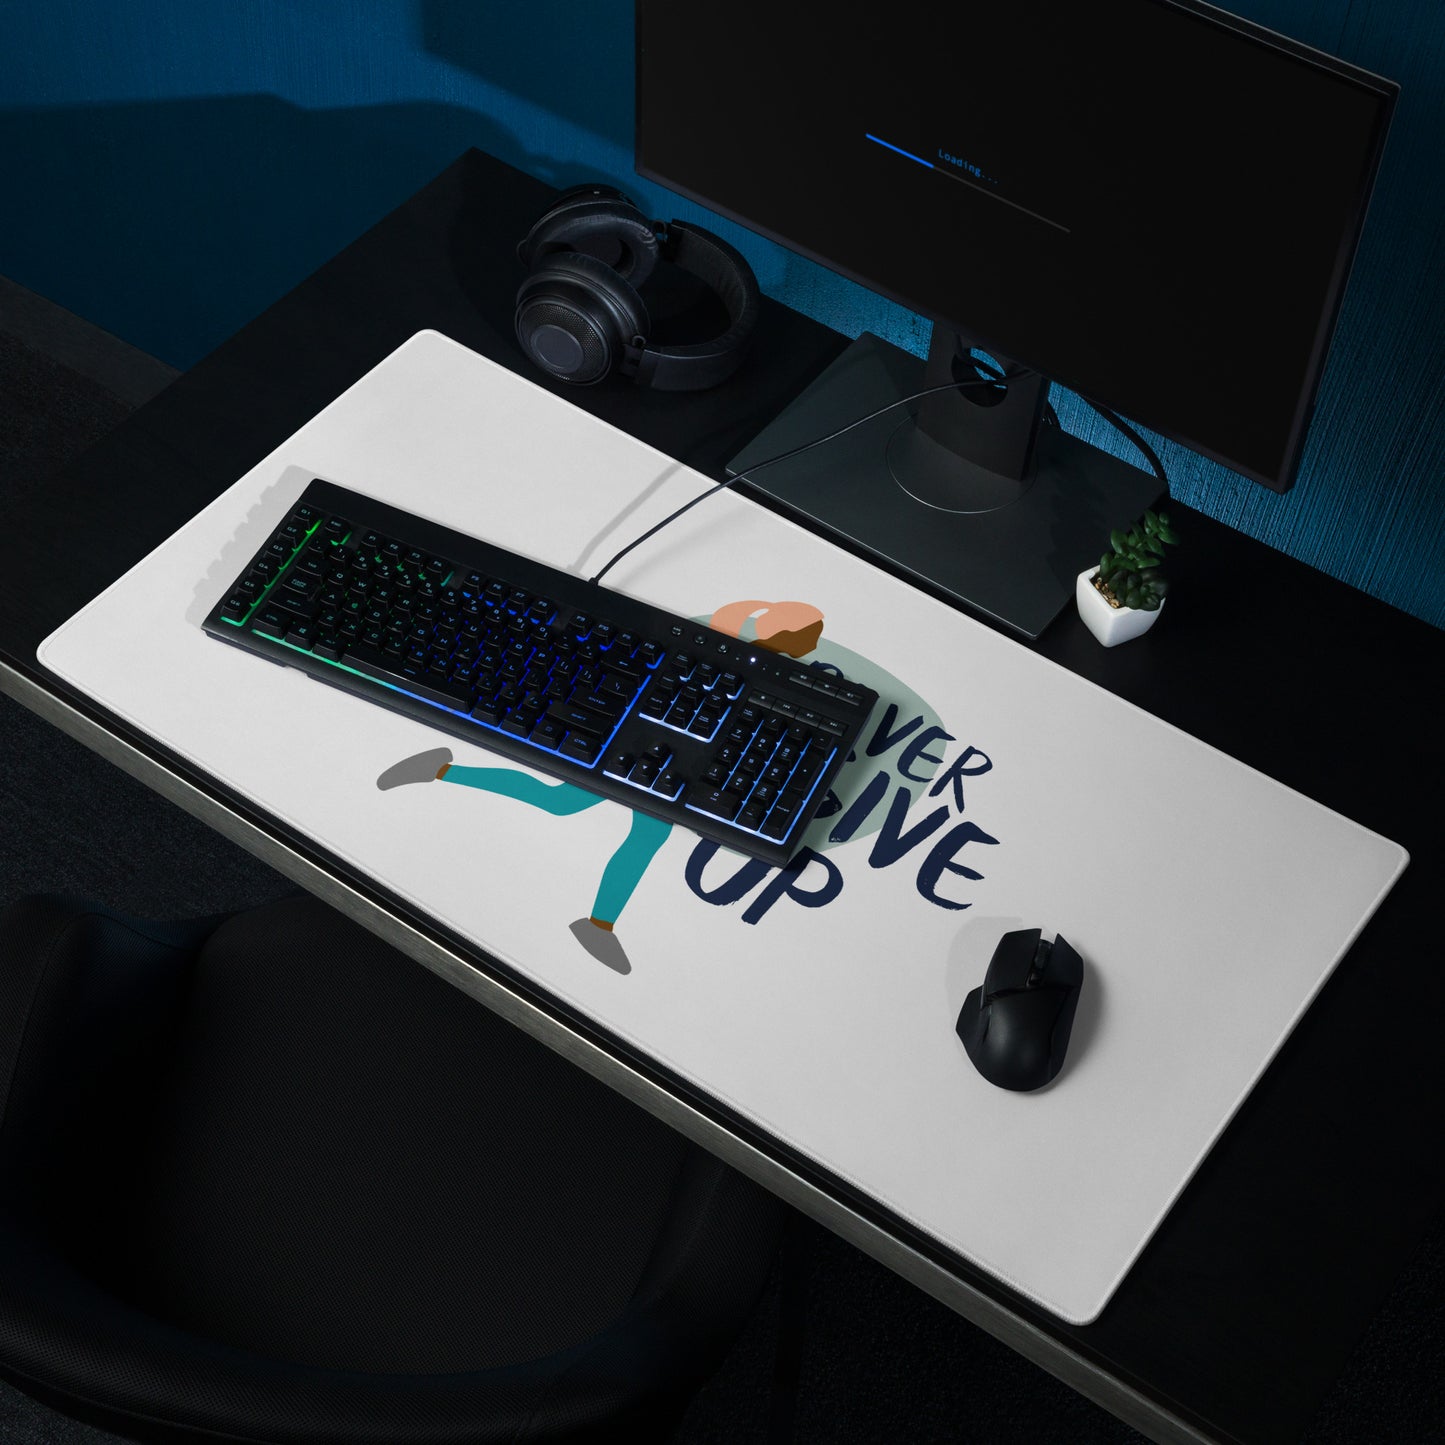 Never Give Up Mouse Pad